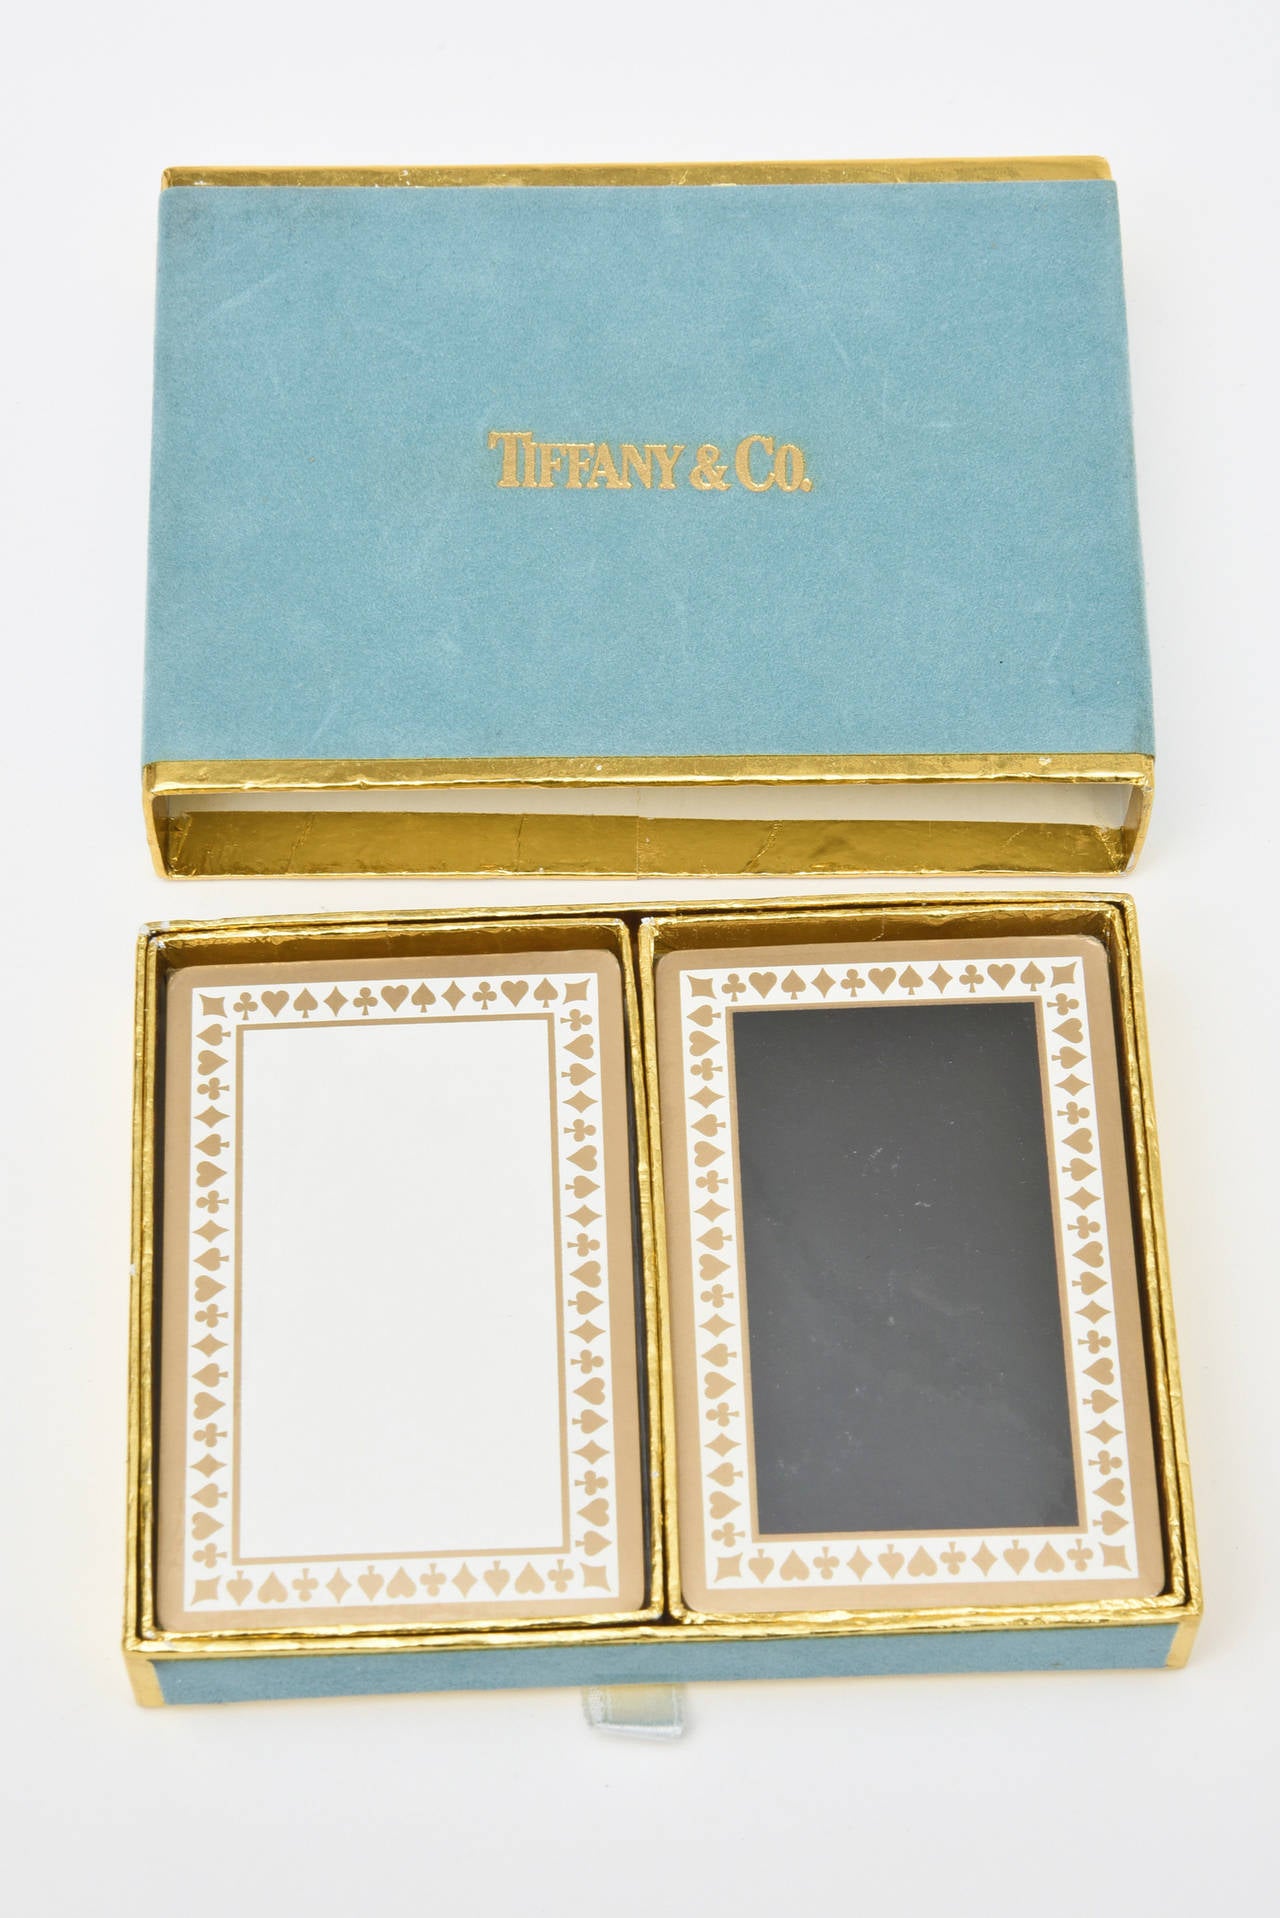 tiffany and co playing cards vintage